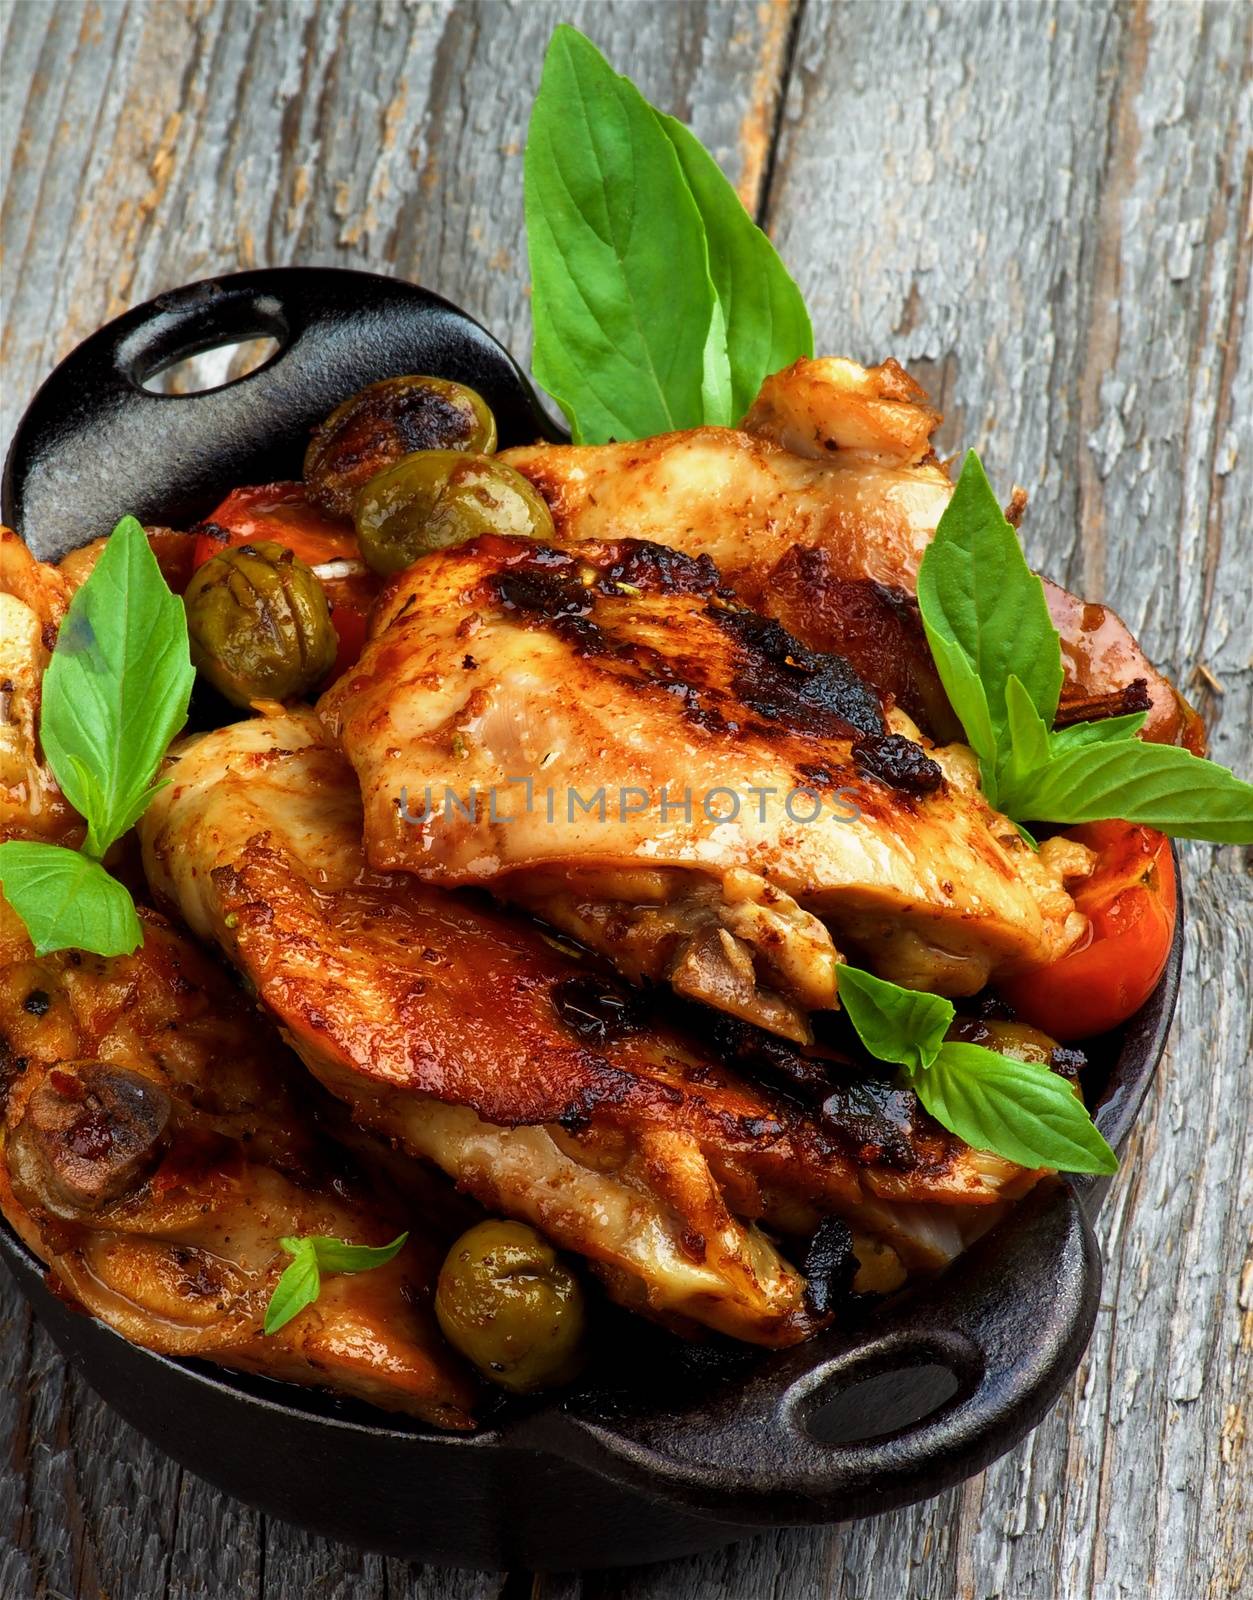 Roasted Chicken with Olives by zhekos